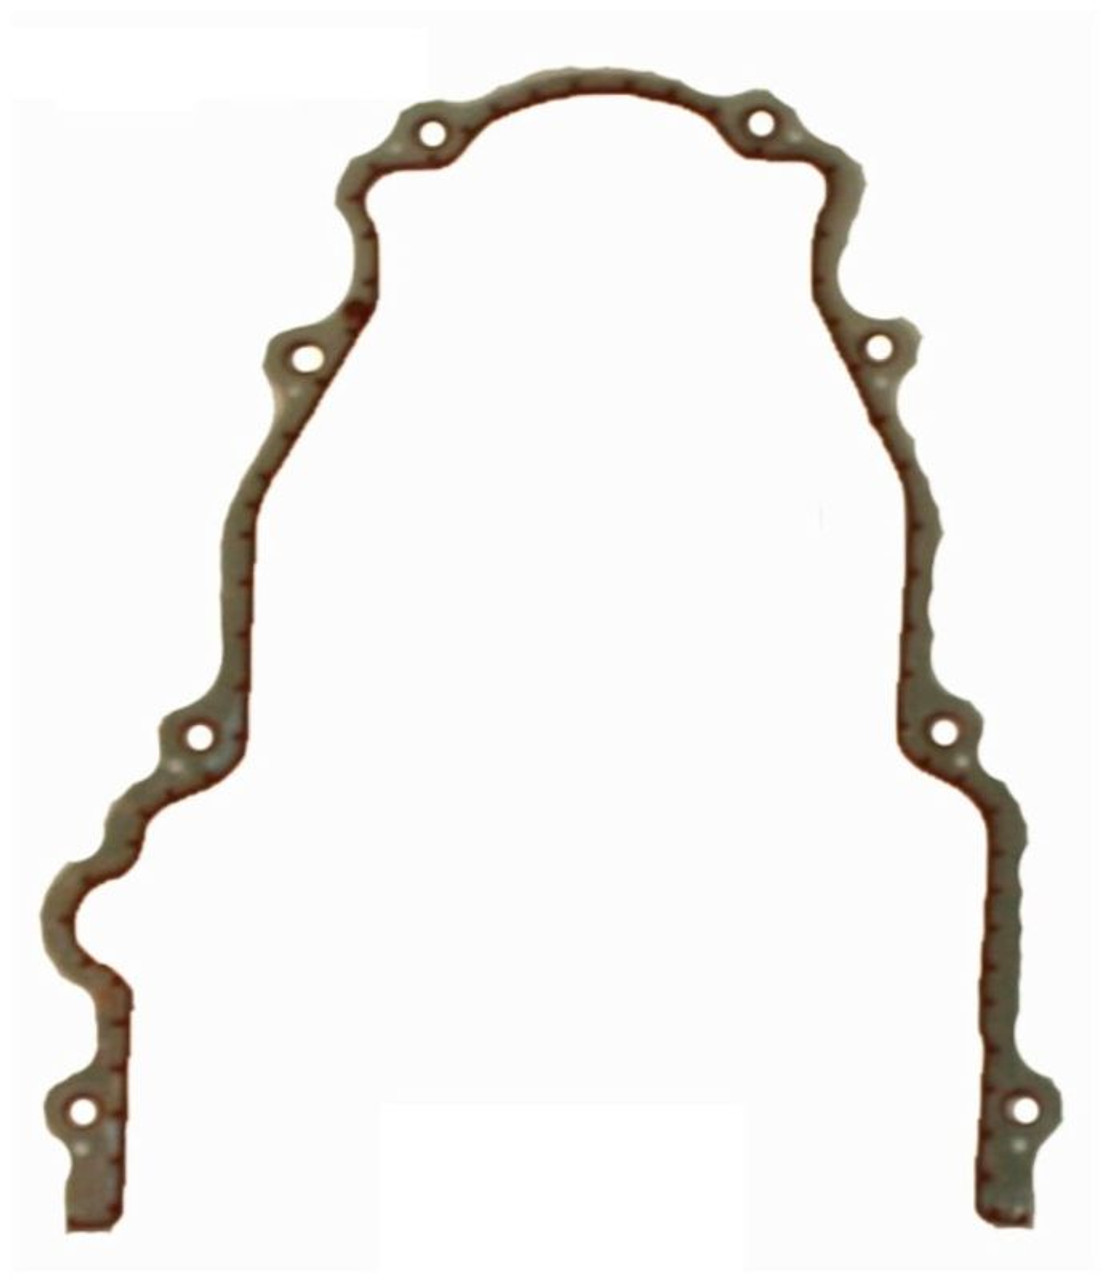 2008 Chevrolet Avalanche 6.0L Engine Timing Cover Gasket TCG293-A -471